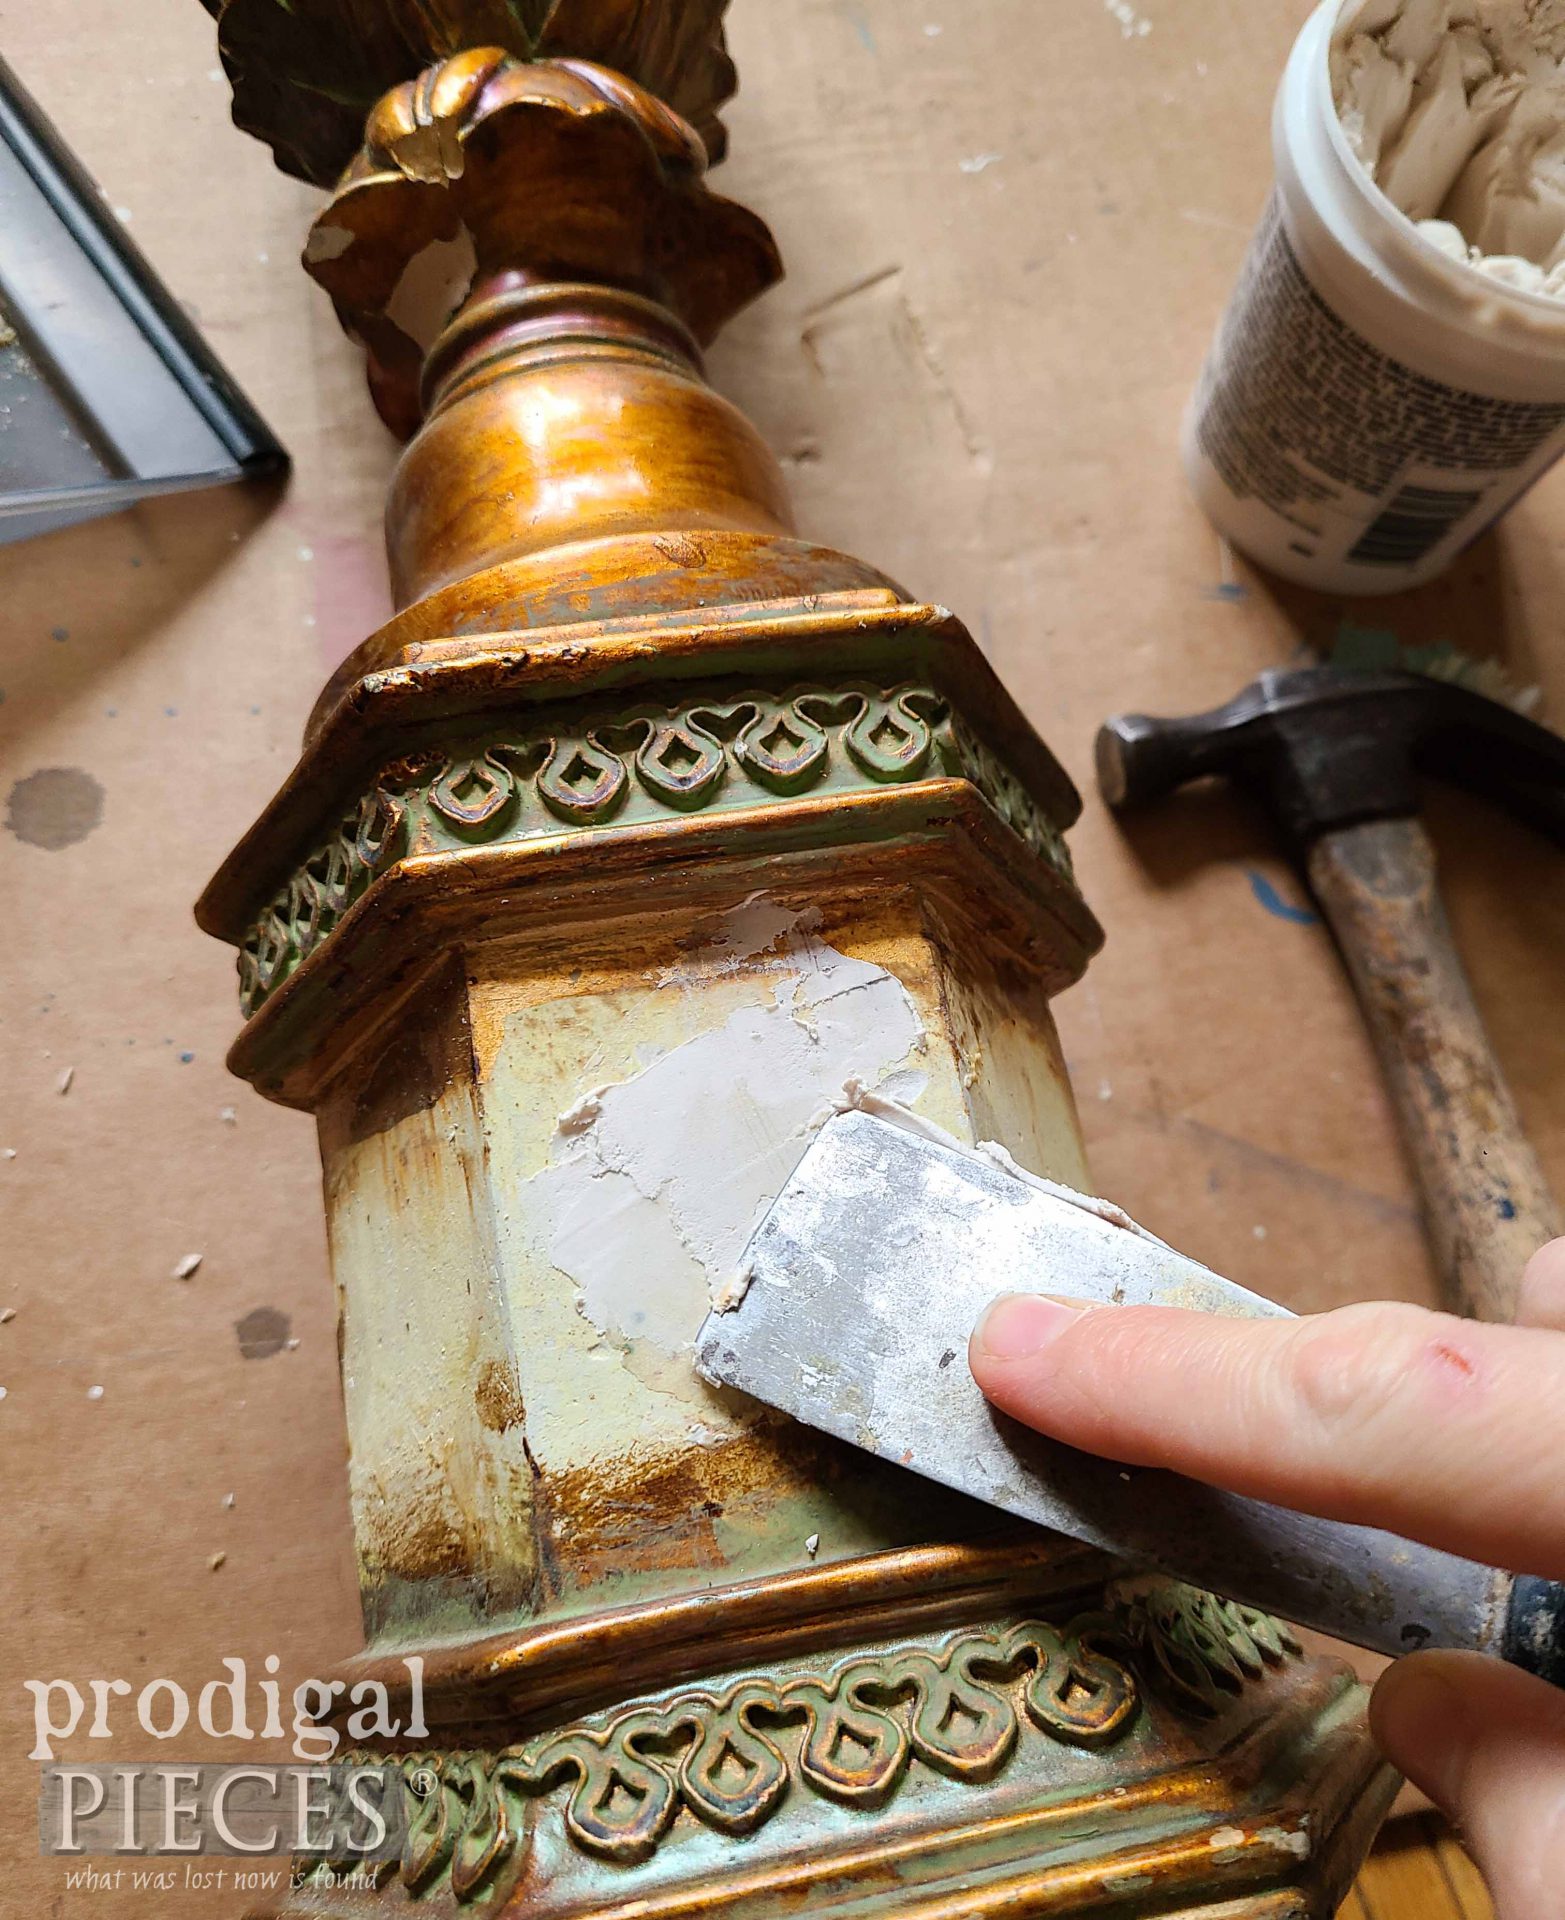 Filling in Broken Decor with Spackling | prodigalpieces.com #prodigalpieces